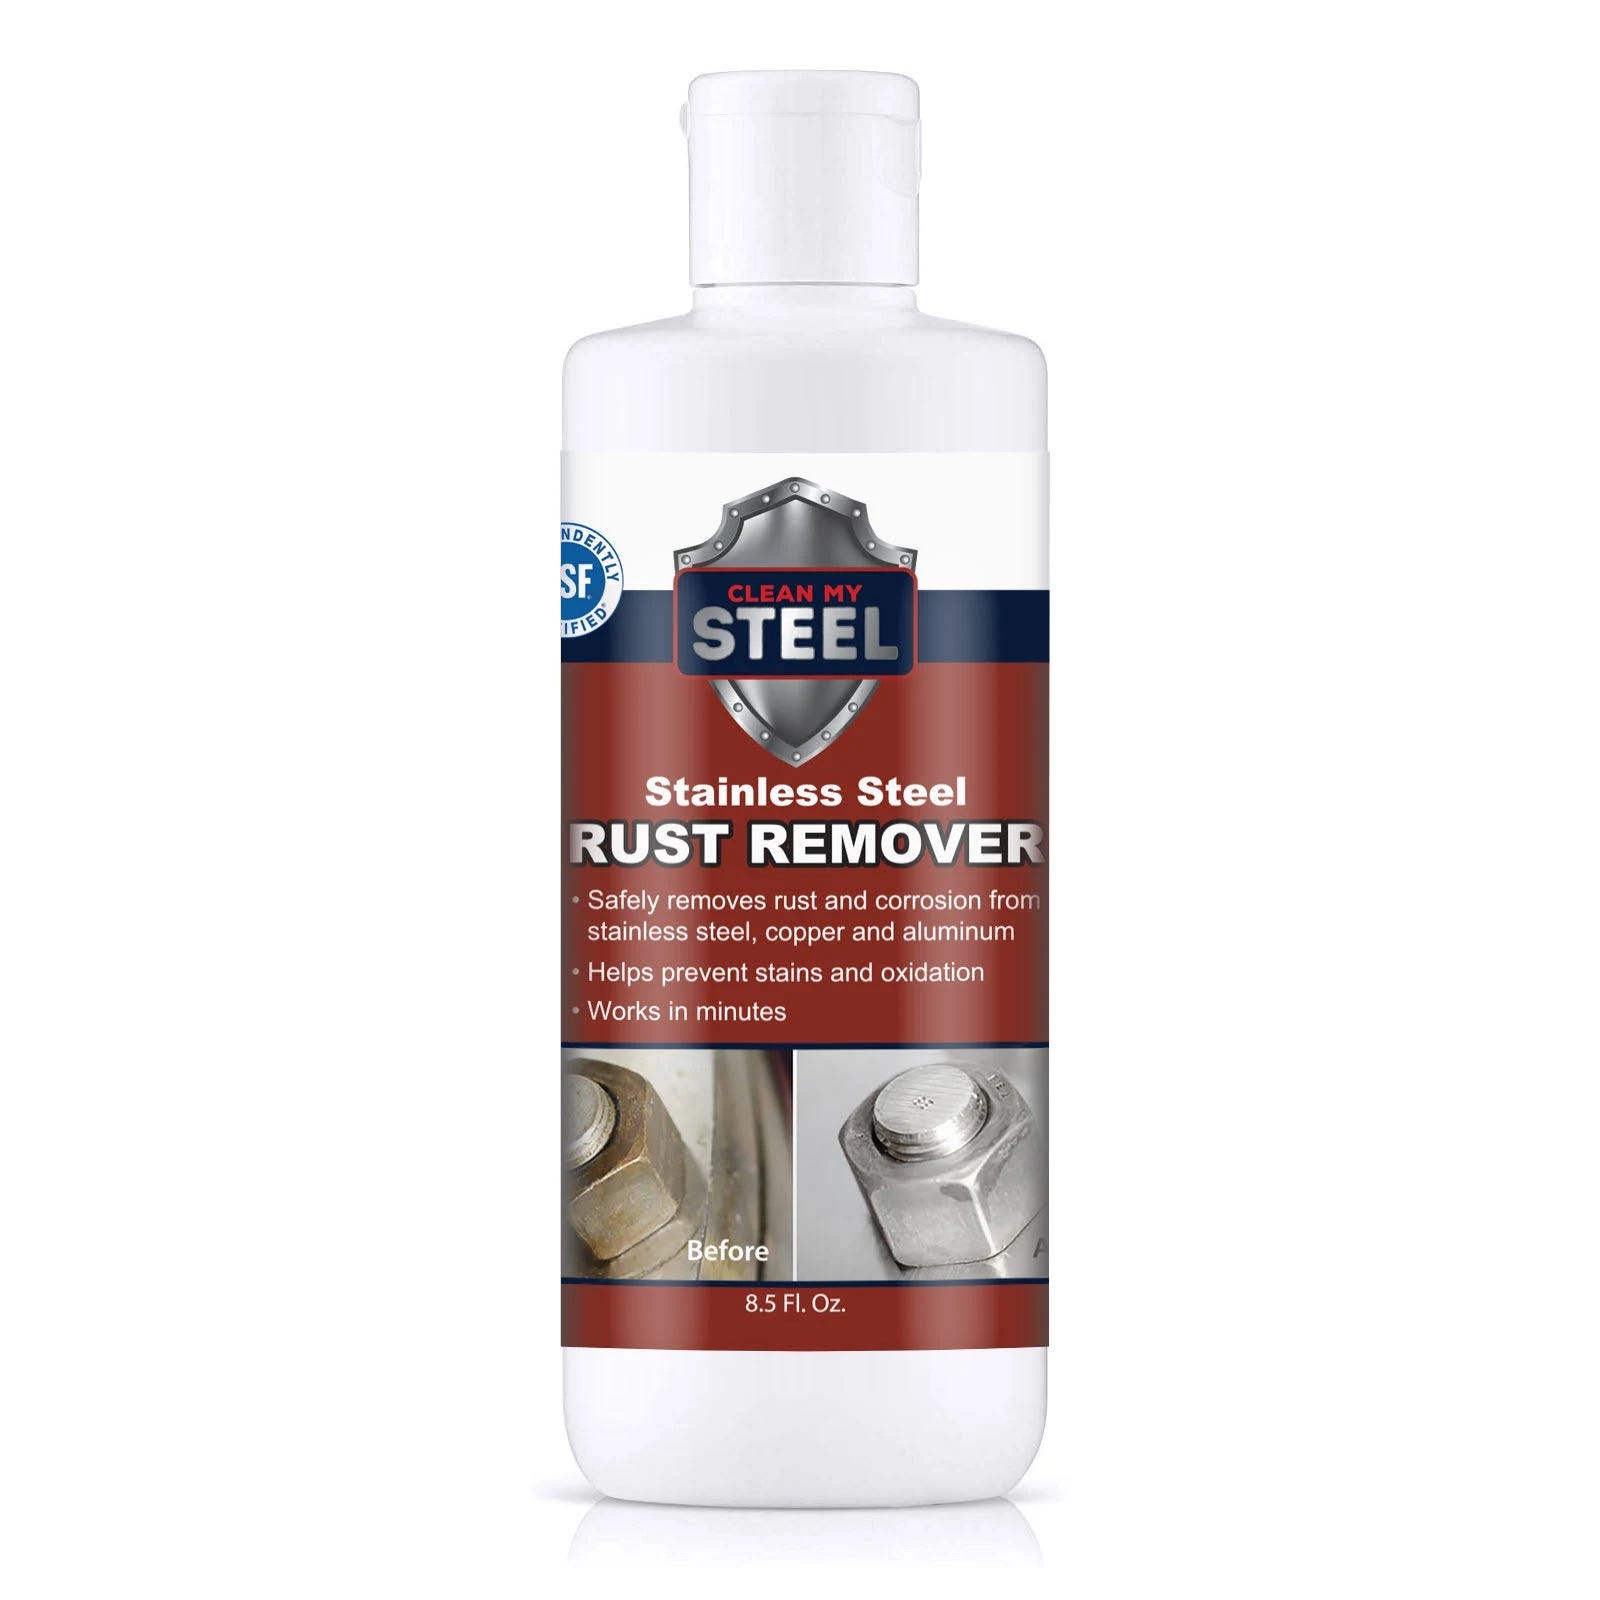 Stainless Steel Rust Remover - Safe, Organic, and Effective Cleaner | Image